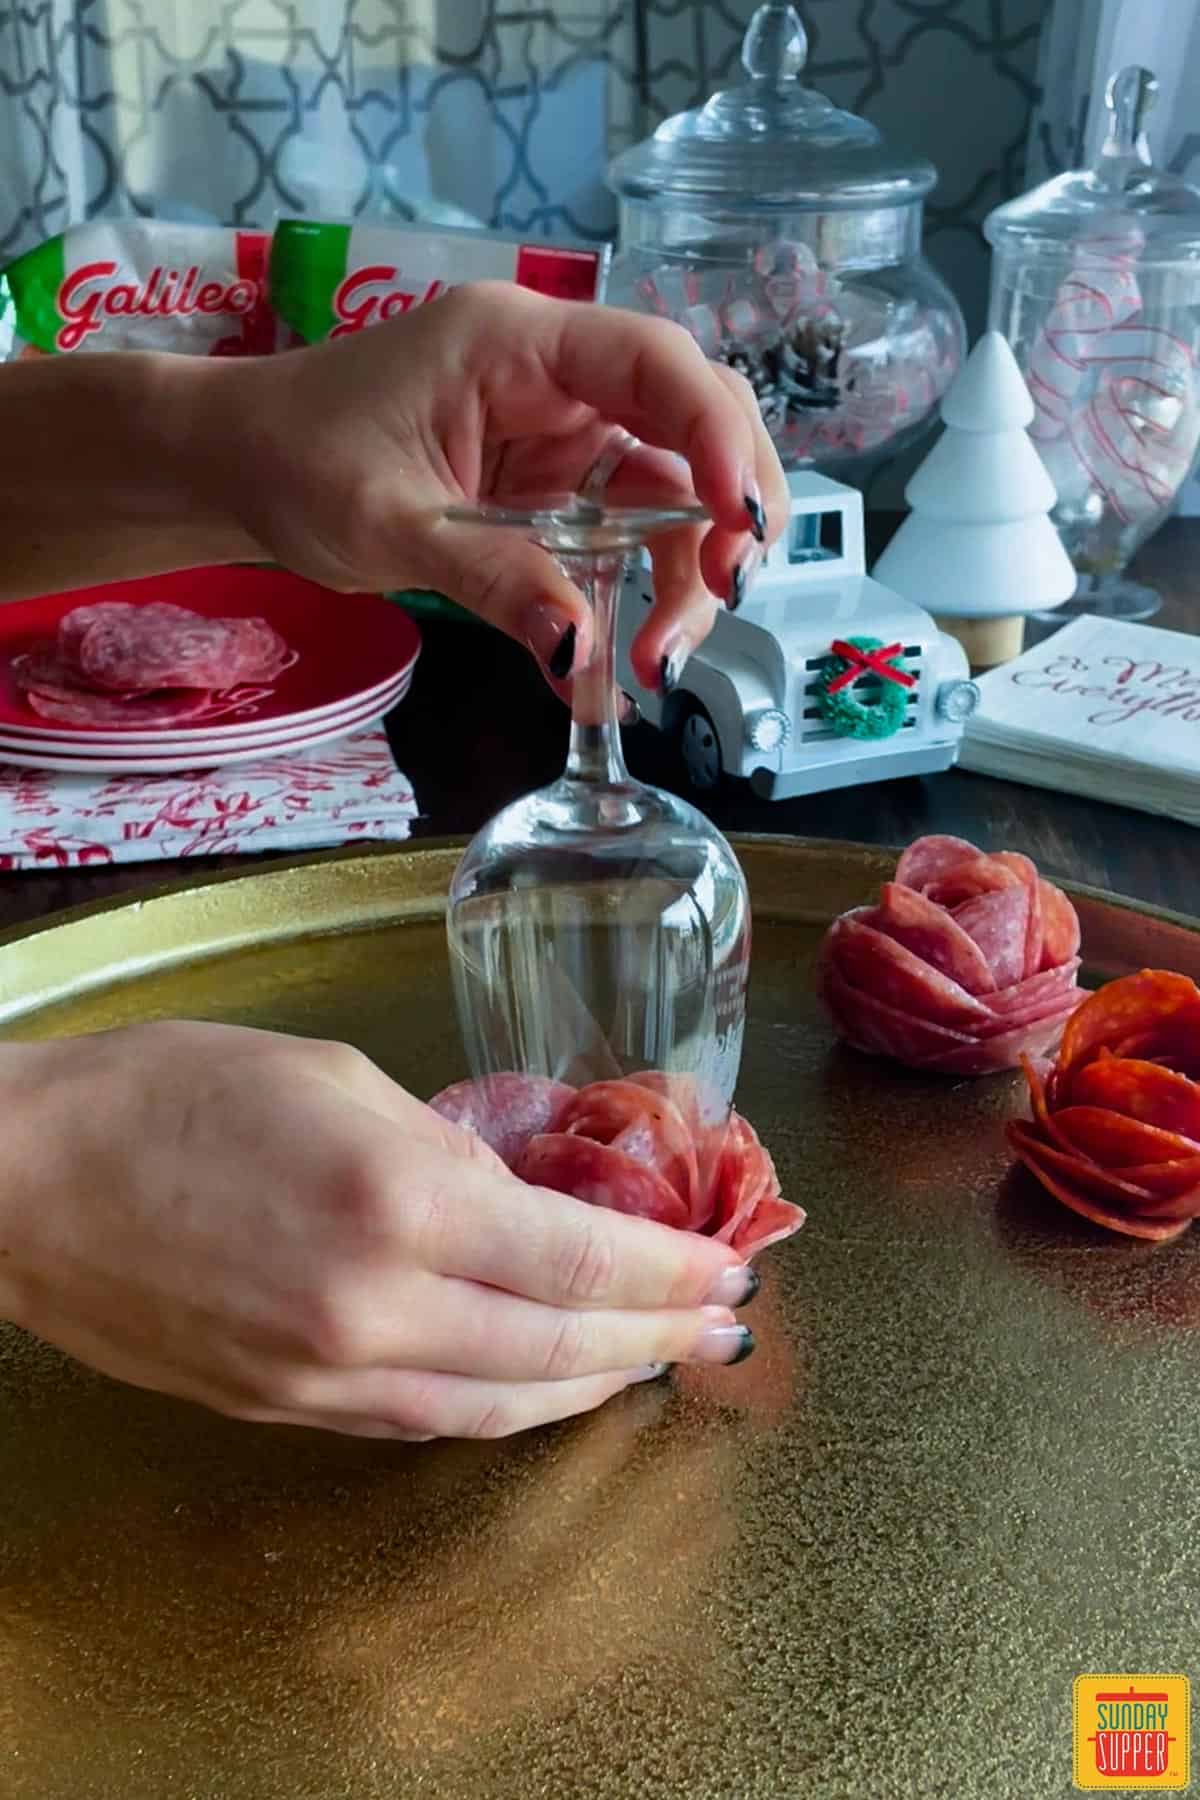 Flipping salami rose onto a platter out of glass